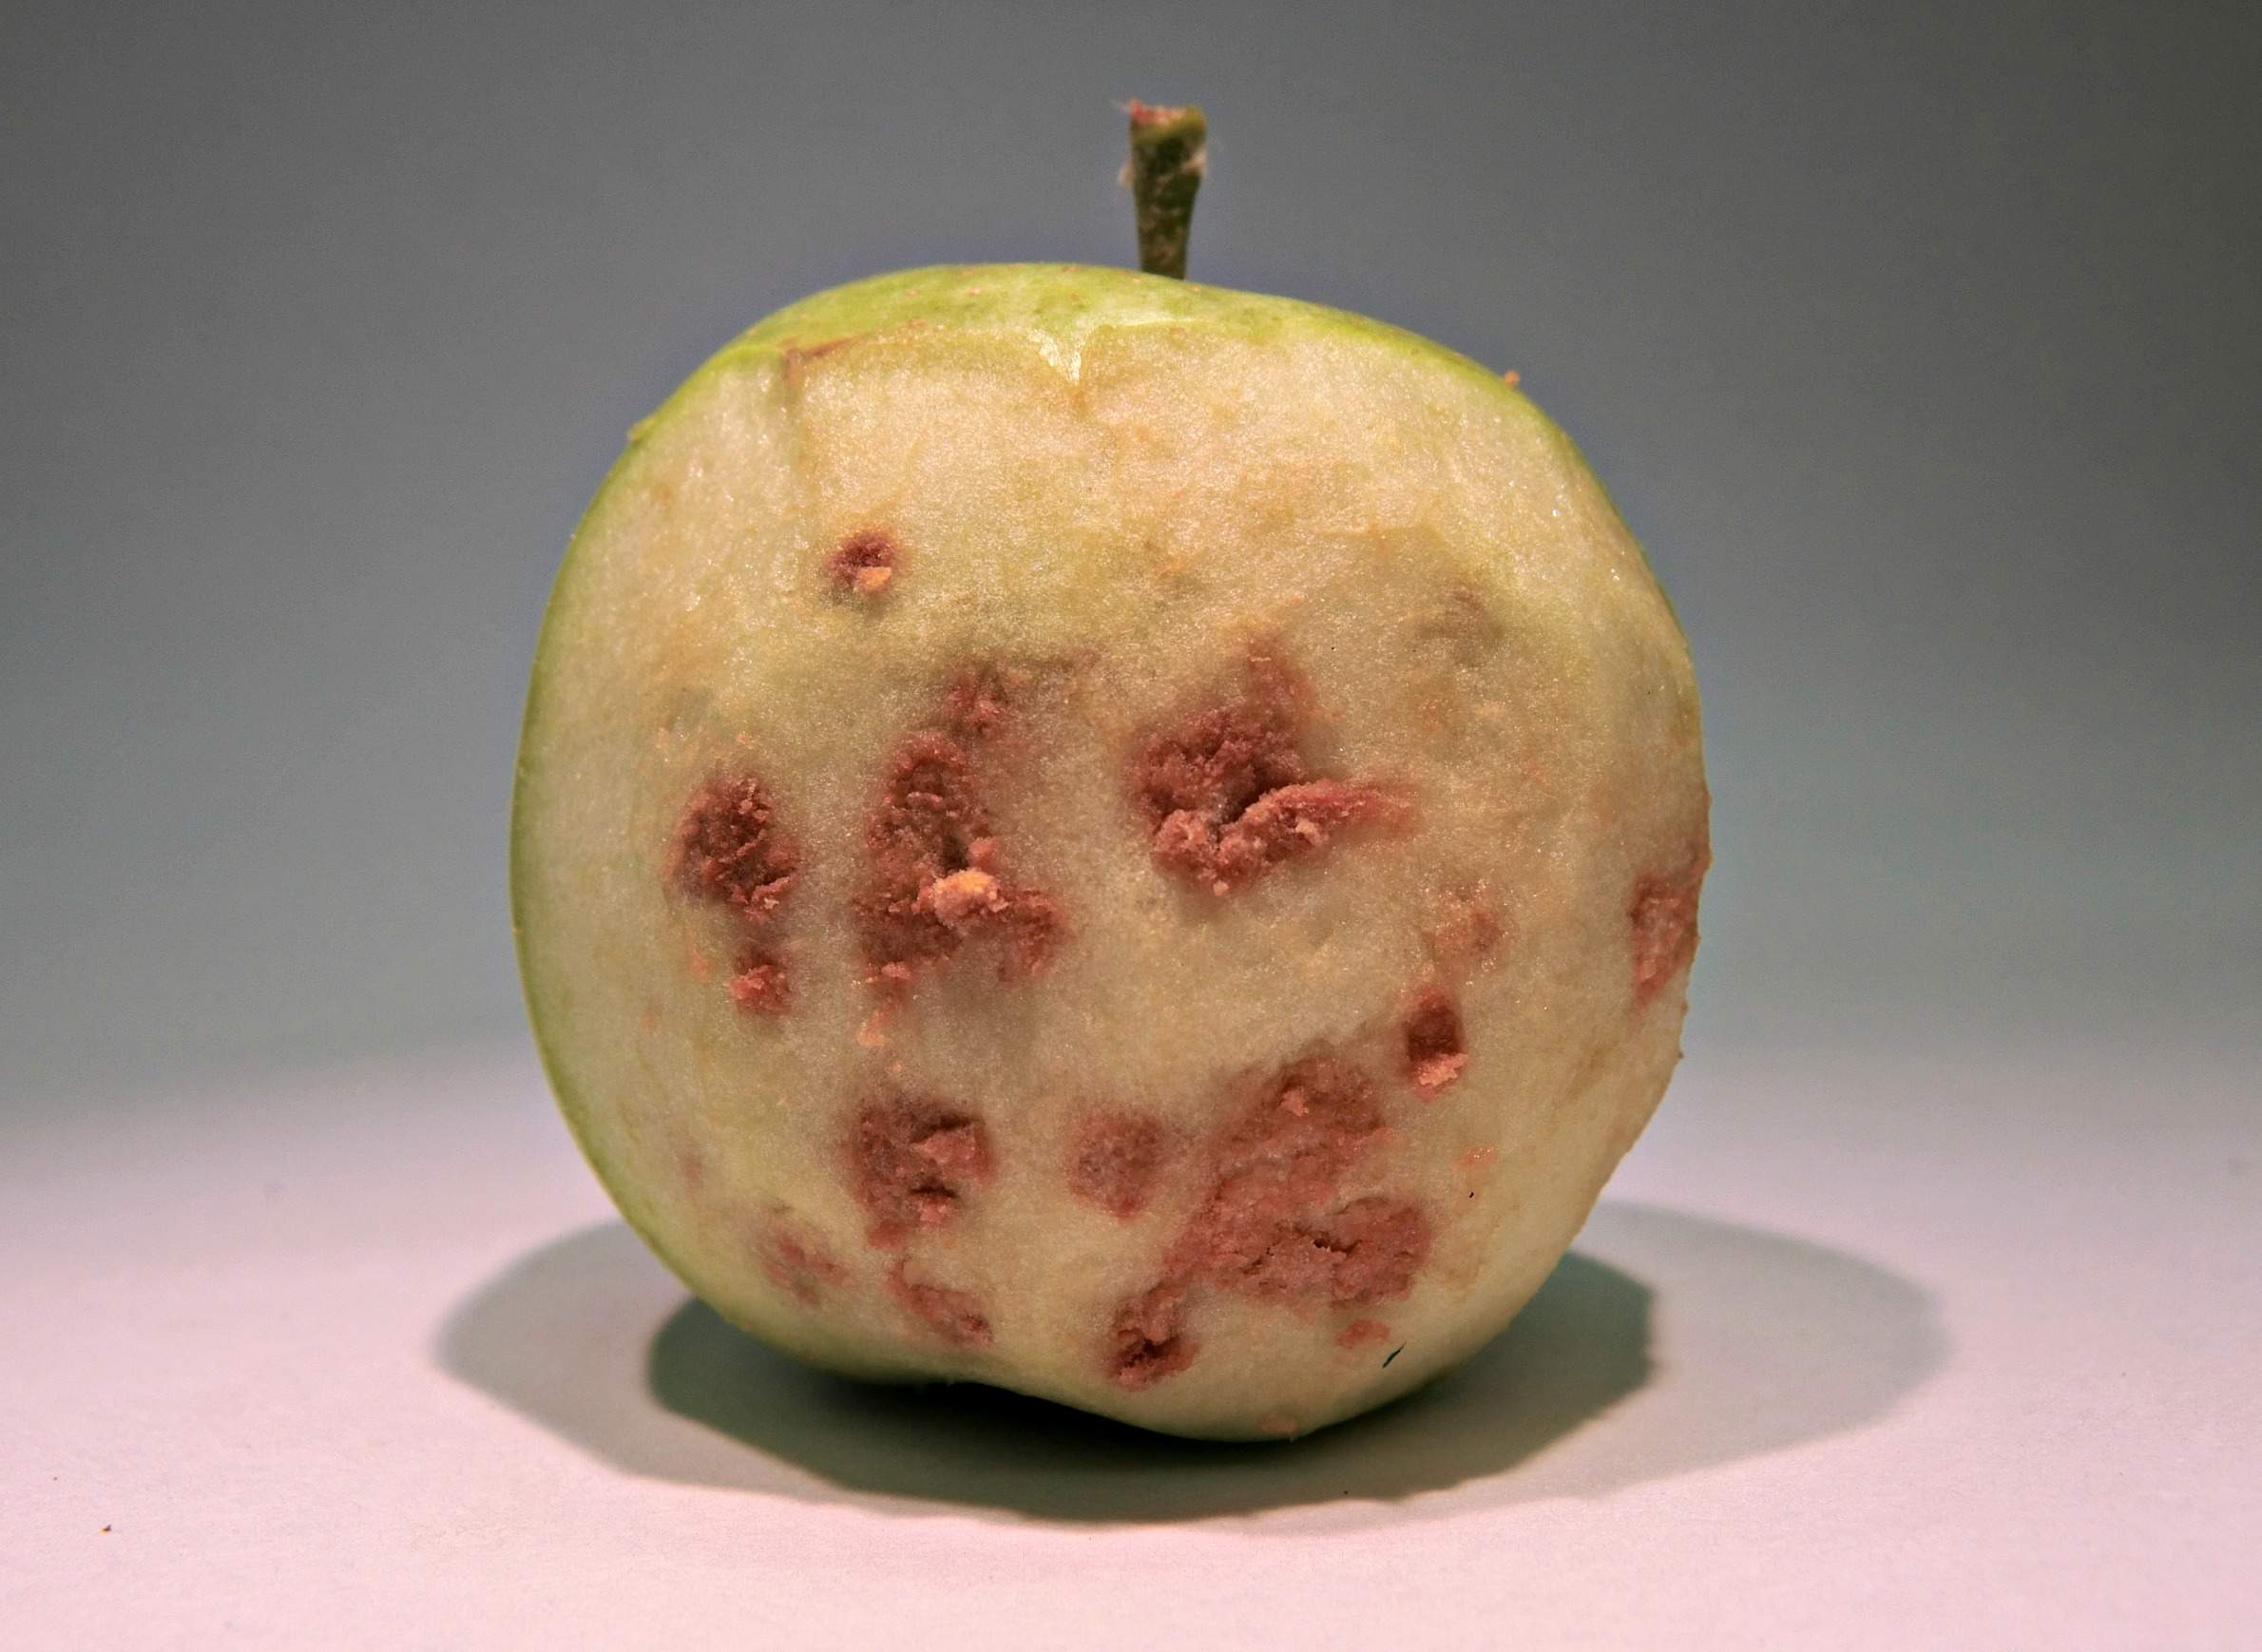 Apple showing brown marmorated stink bug damage